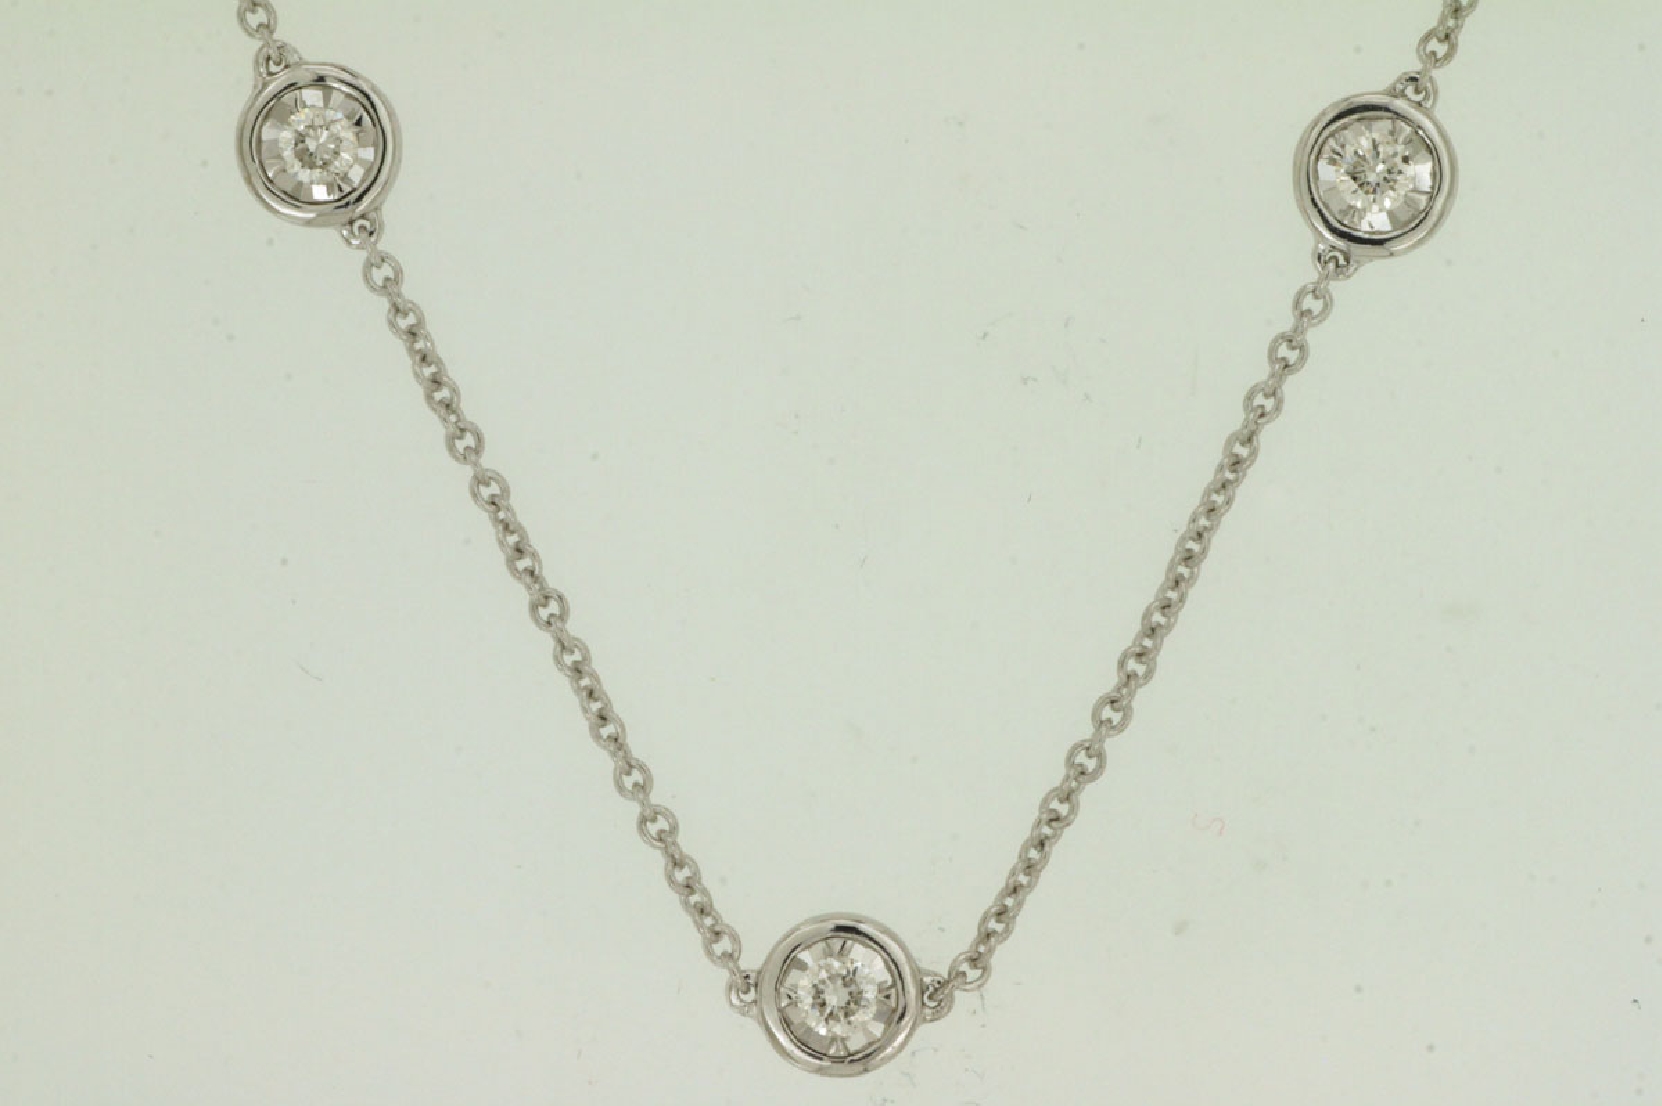 14K White Gold Diamond Station Necklace
0.50ct

18 Inches 